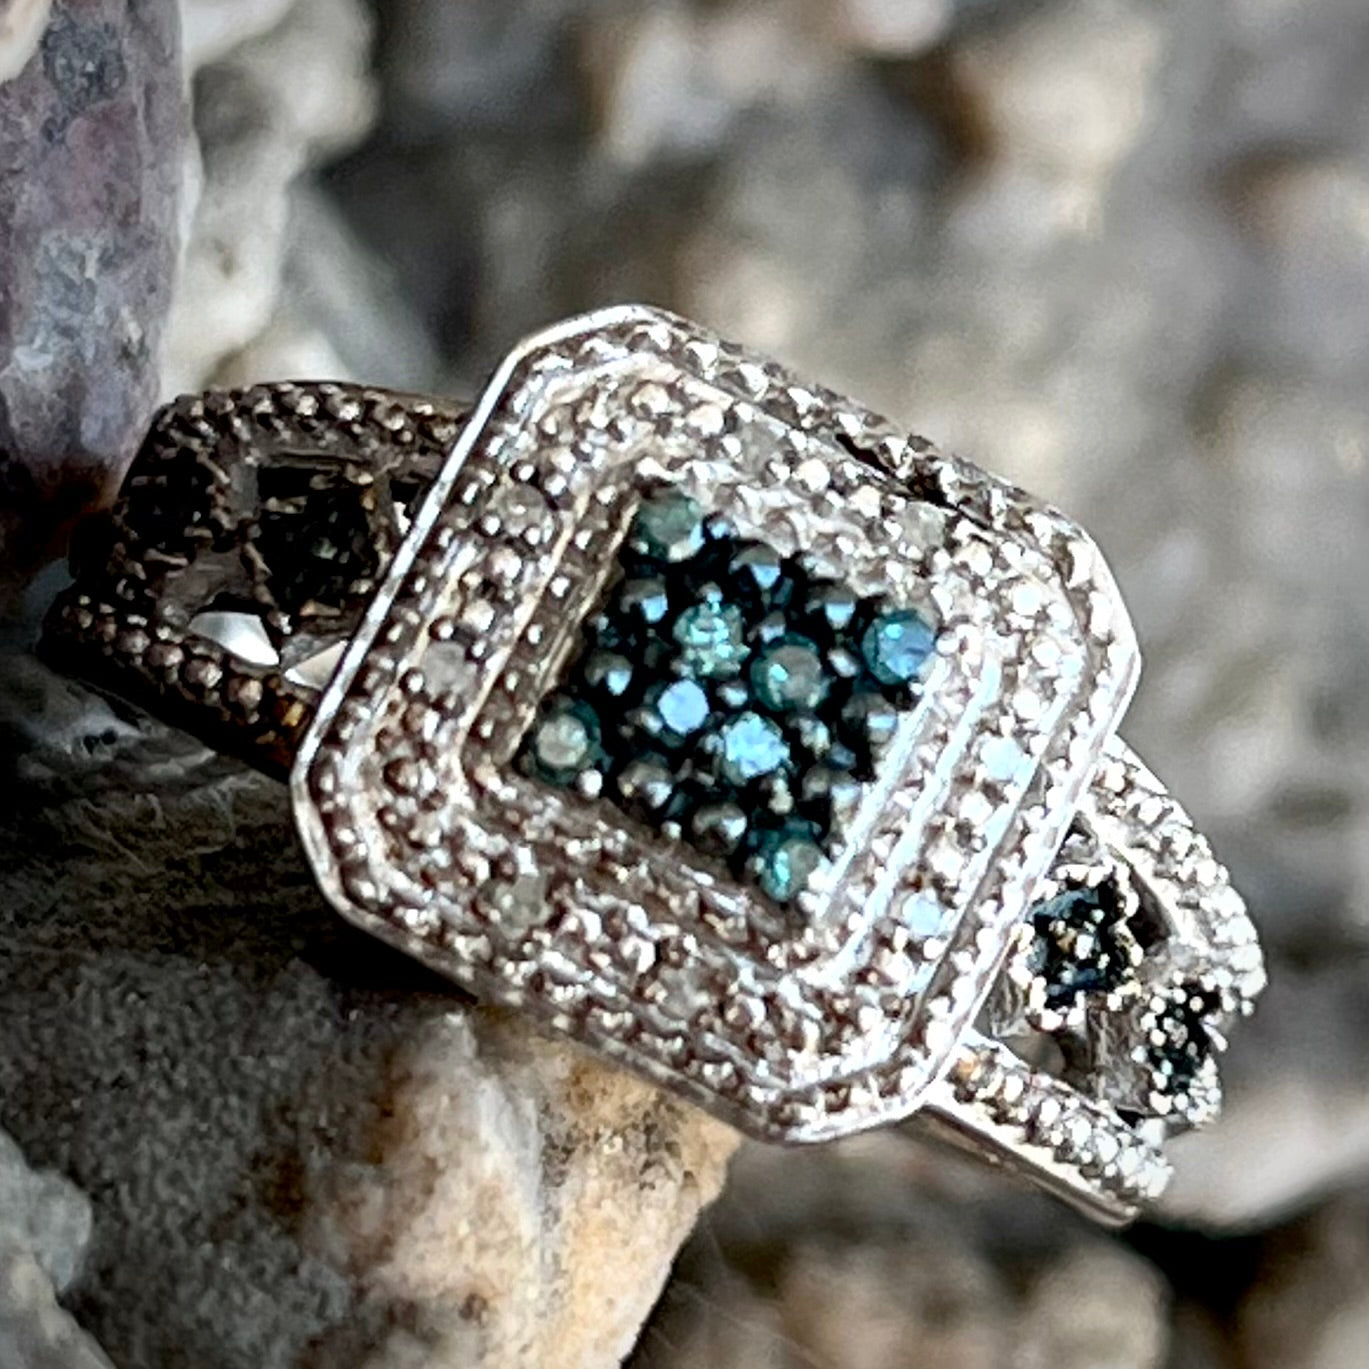 A sterling silver ring set with blue and white diamonds.